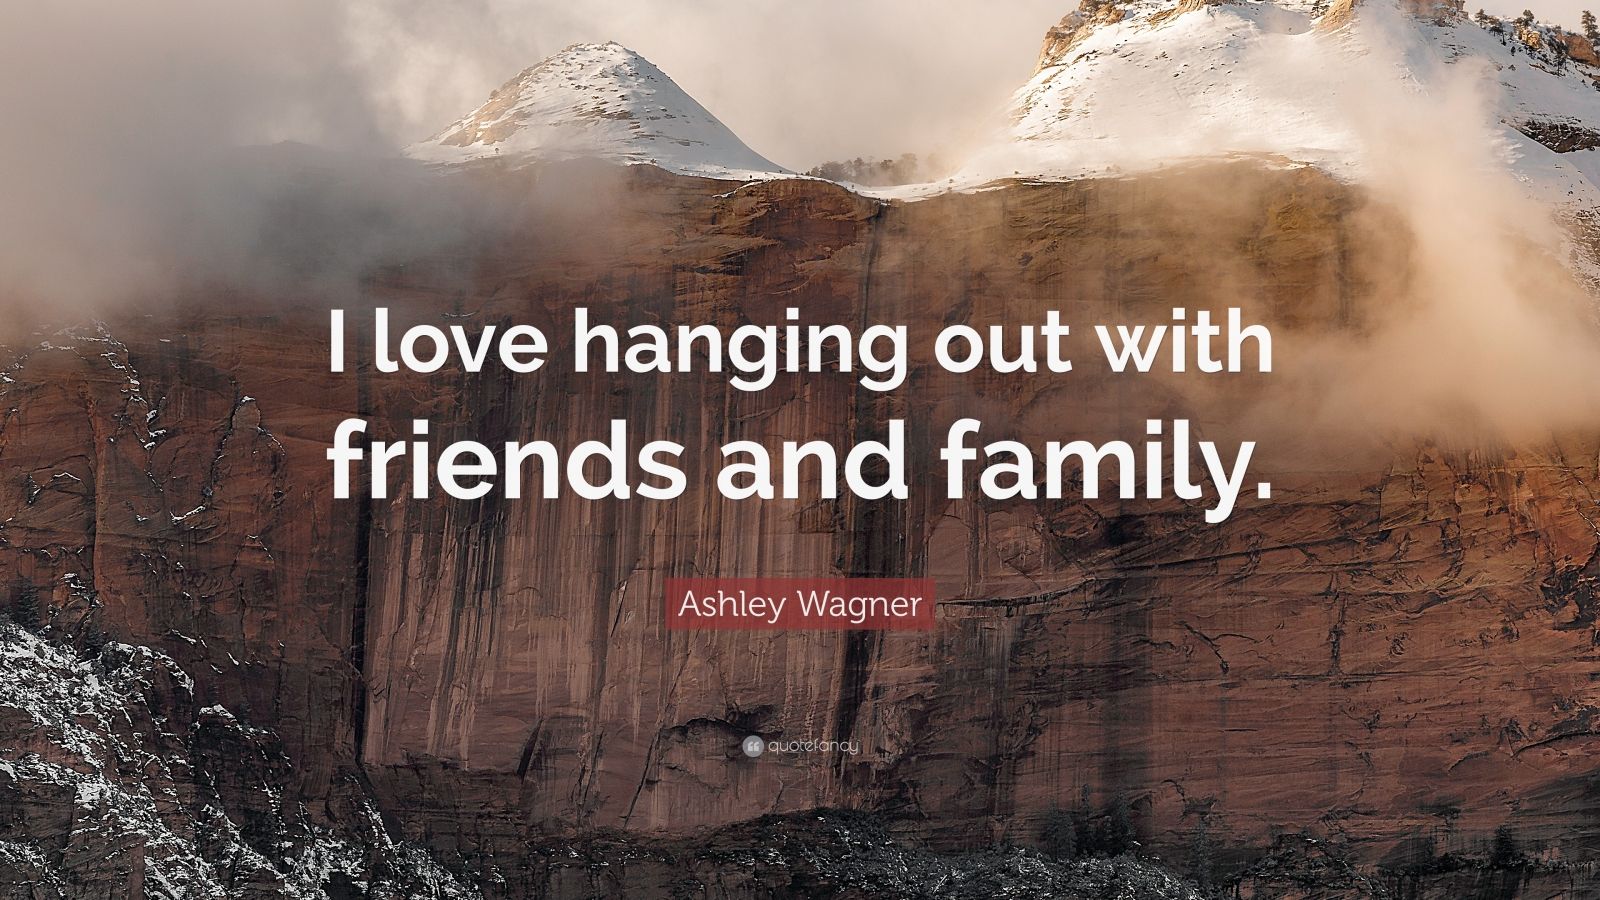 Ashley Wagner Quote: “I love hanging out with friends and family.” (7